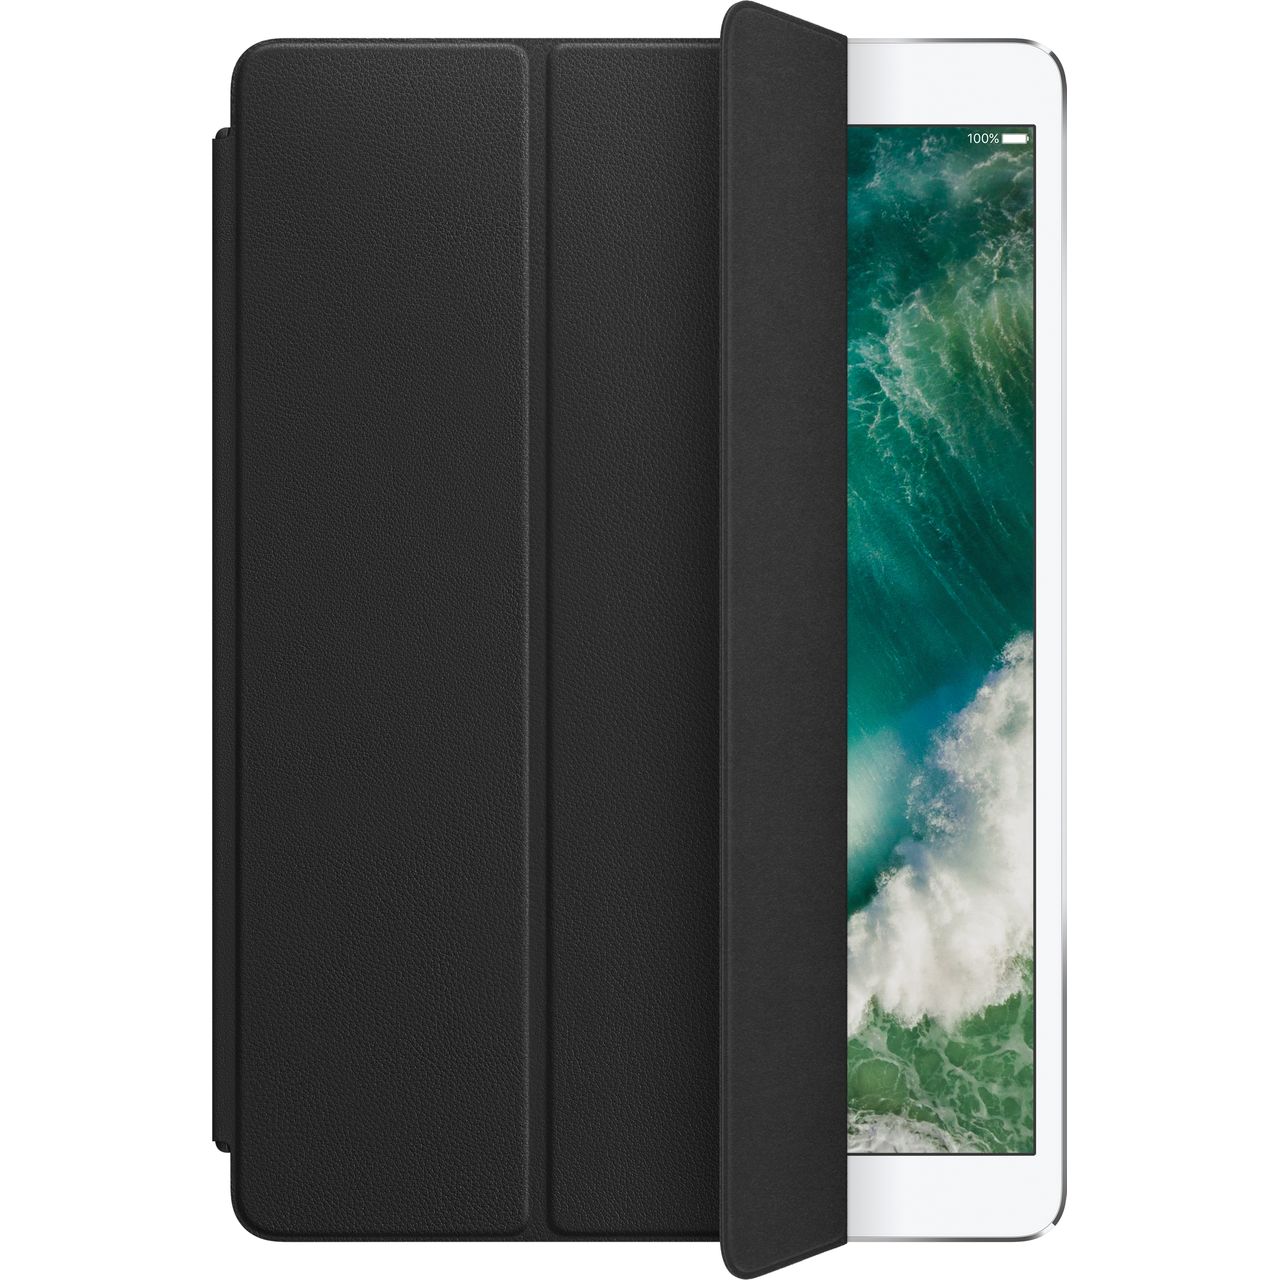 Apple Leather Sleeve for 10.5 inch iPad Pro Review